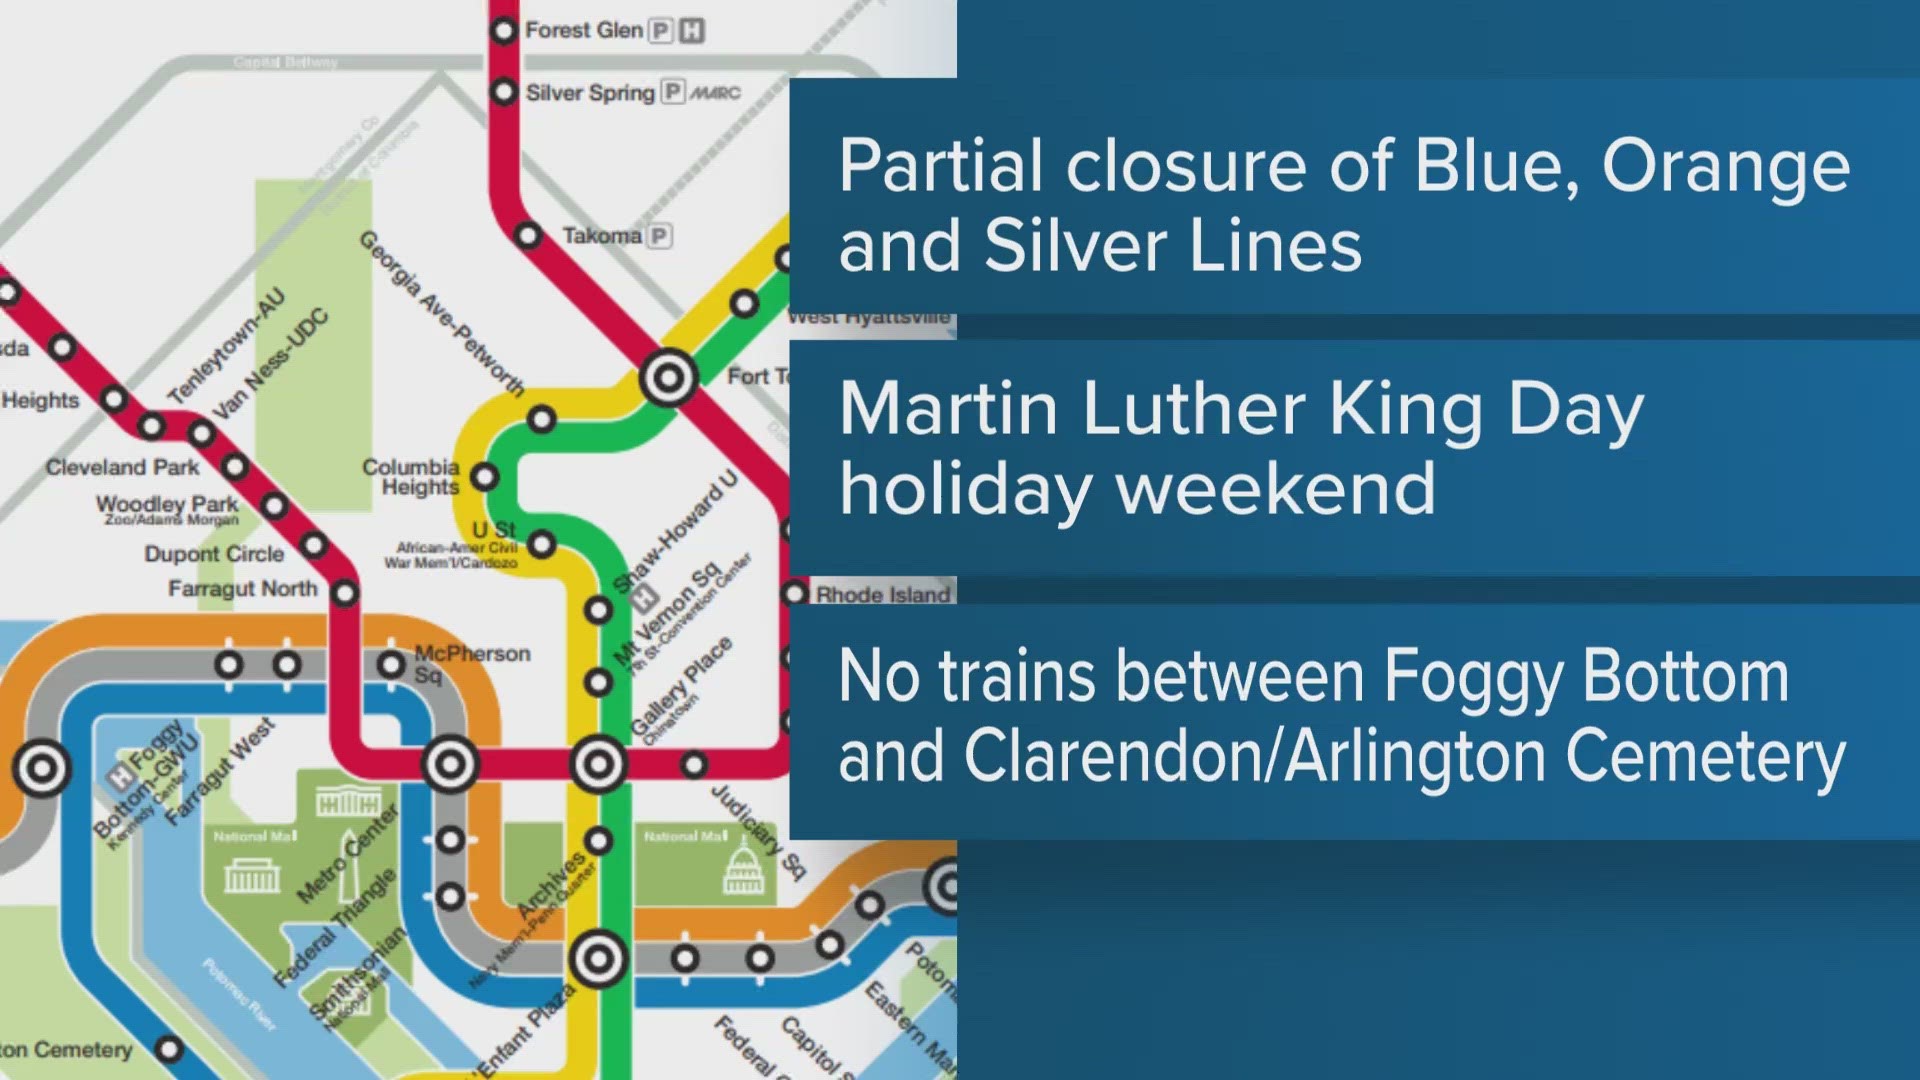 It will impact the Blue, Orange, and Silver Lines beginning on Friday, January 12.